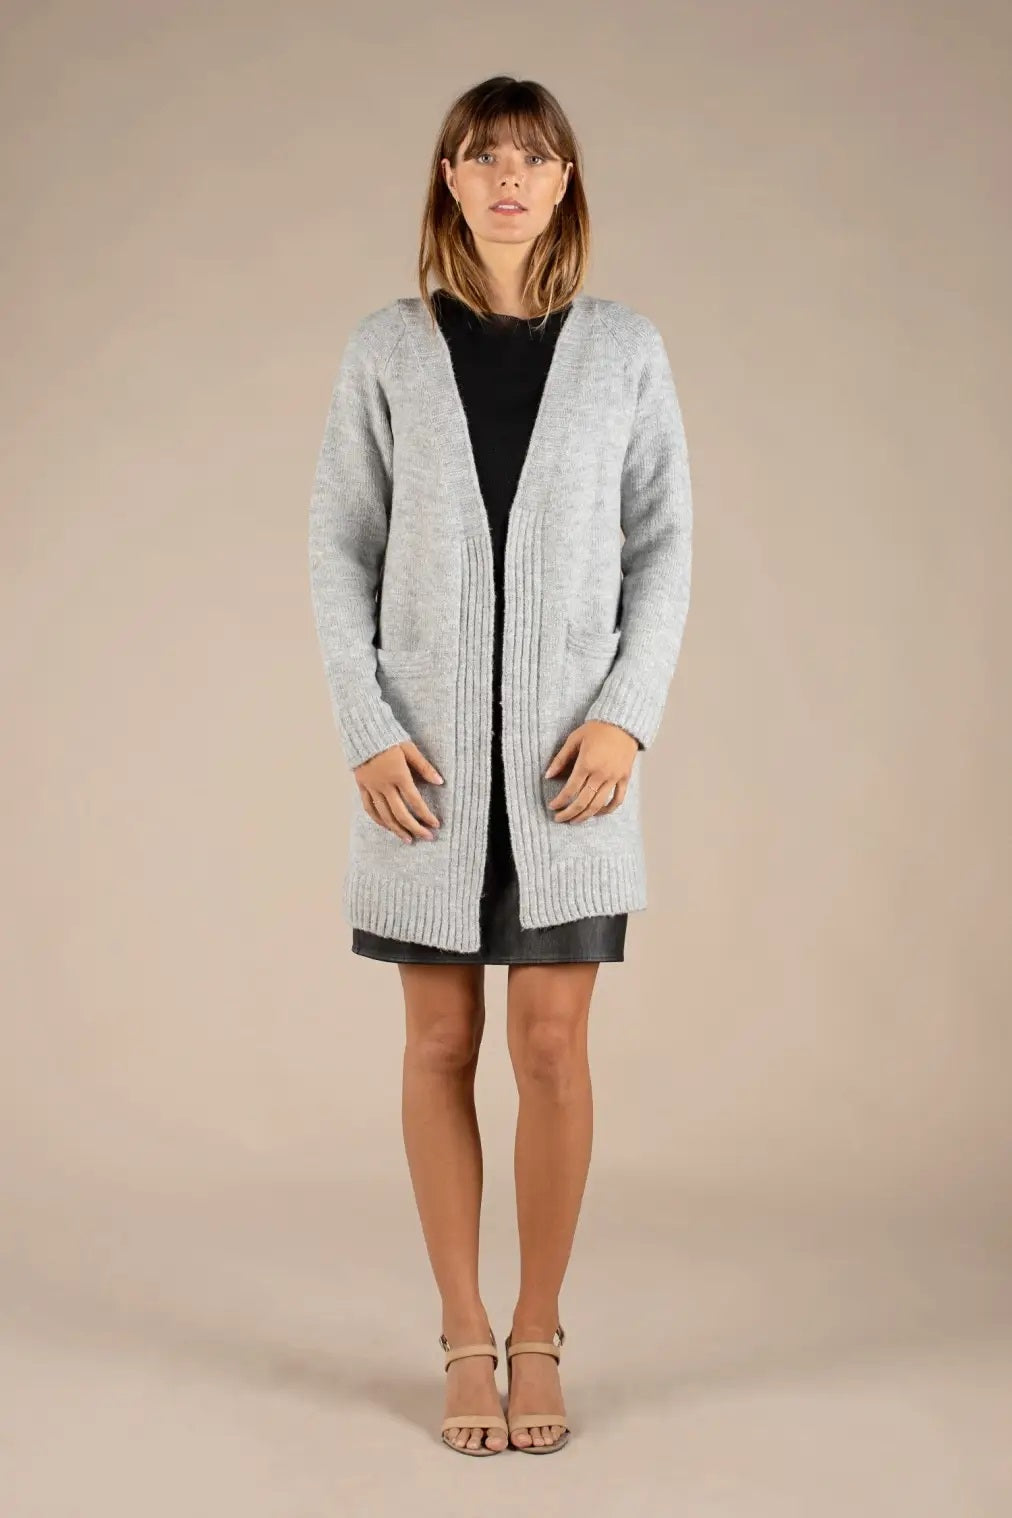 all:row, The Rayna Cardigan Sweater in Heather Grey - Boutique Dandelion